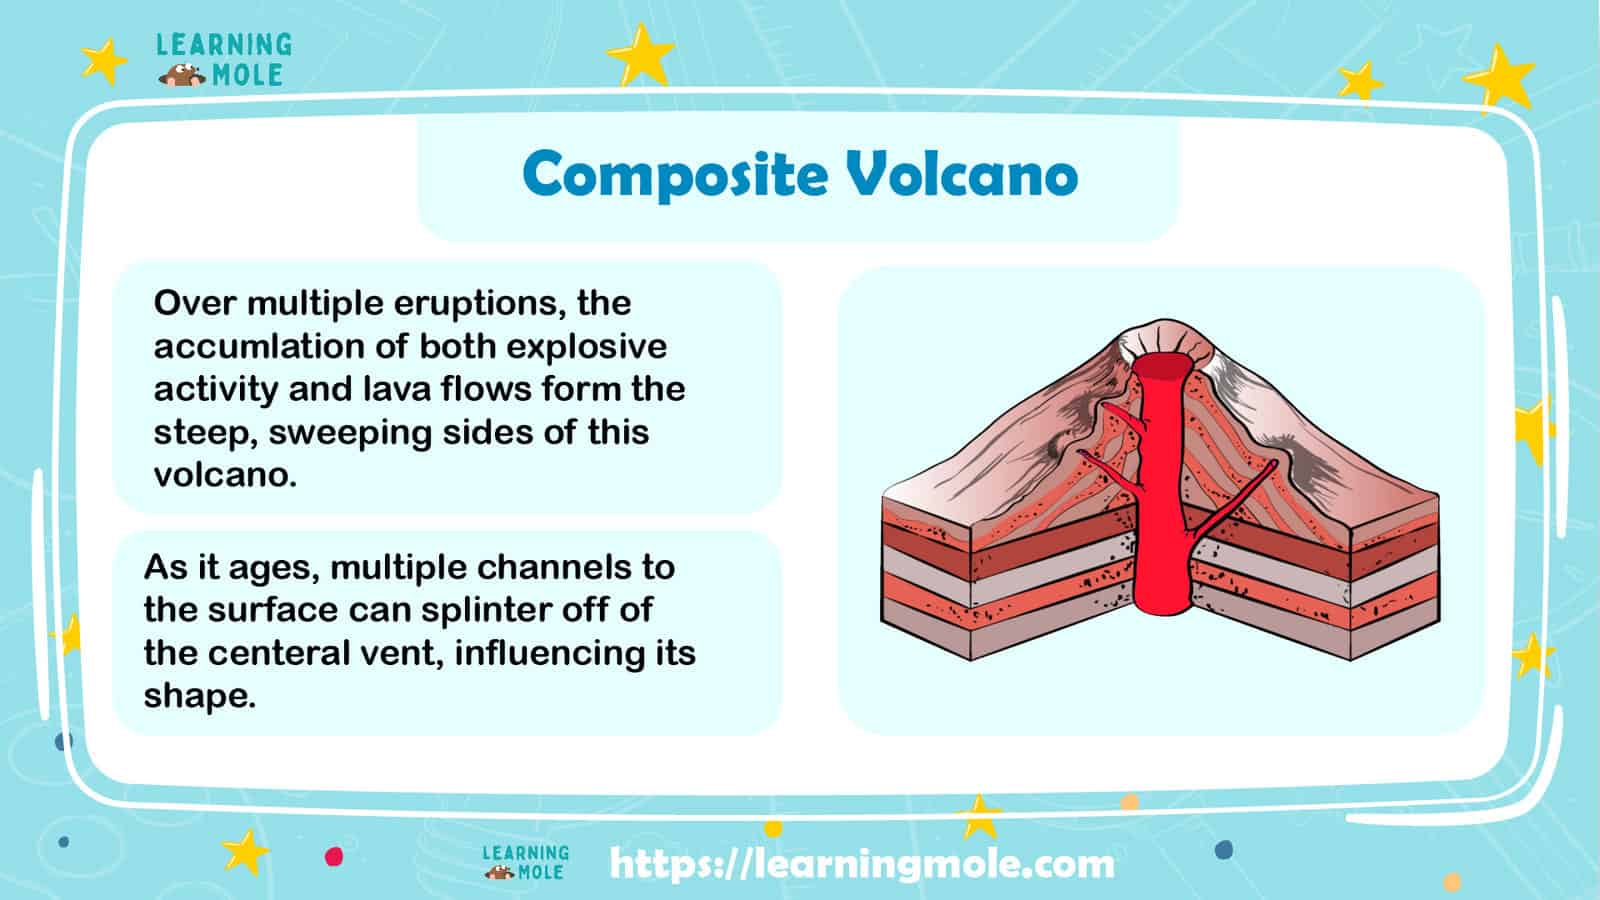 What is a Composite Volcano?